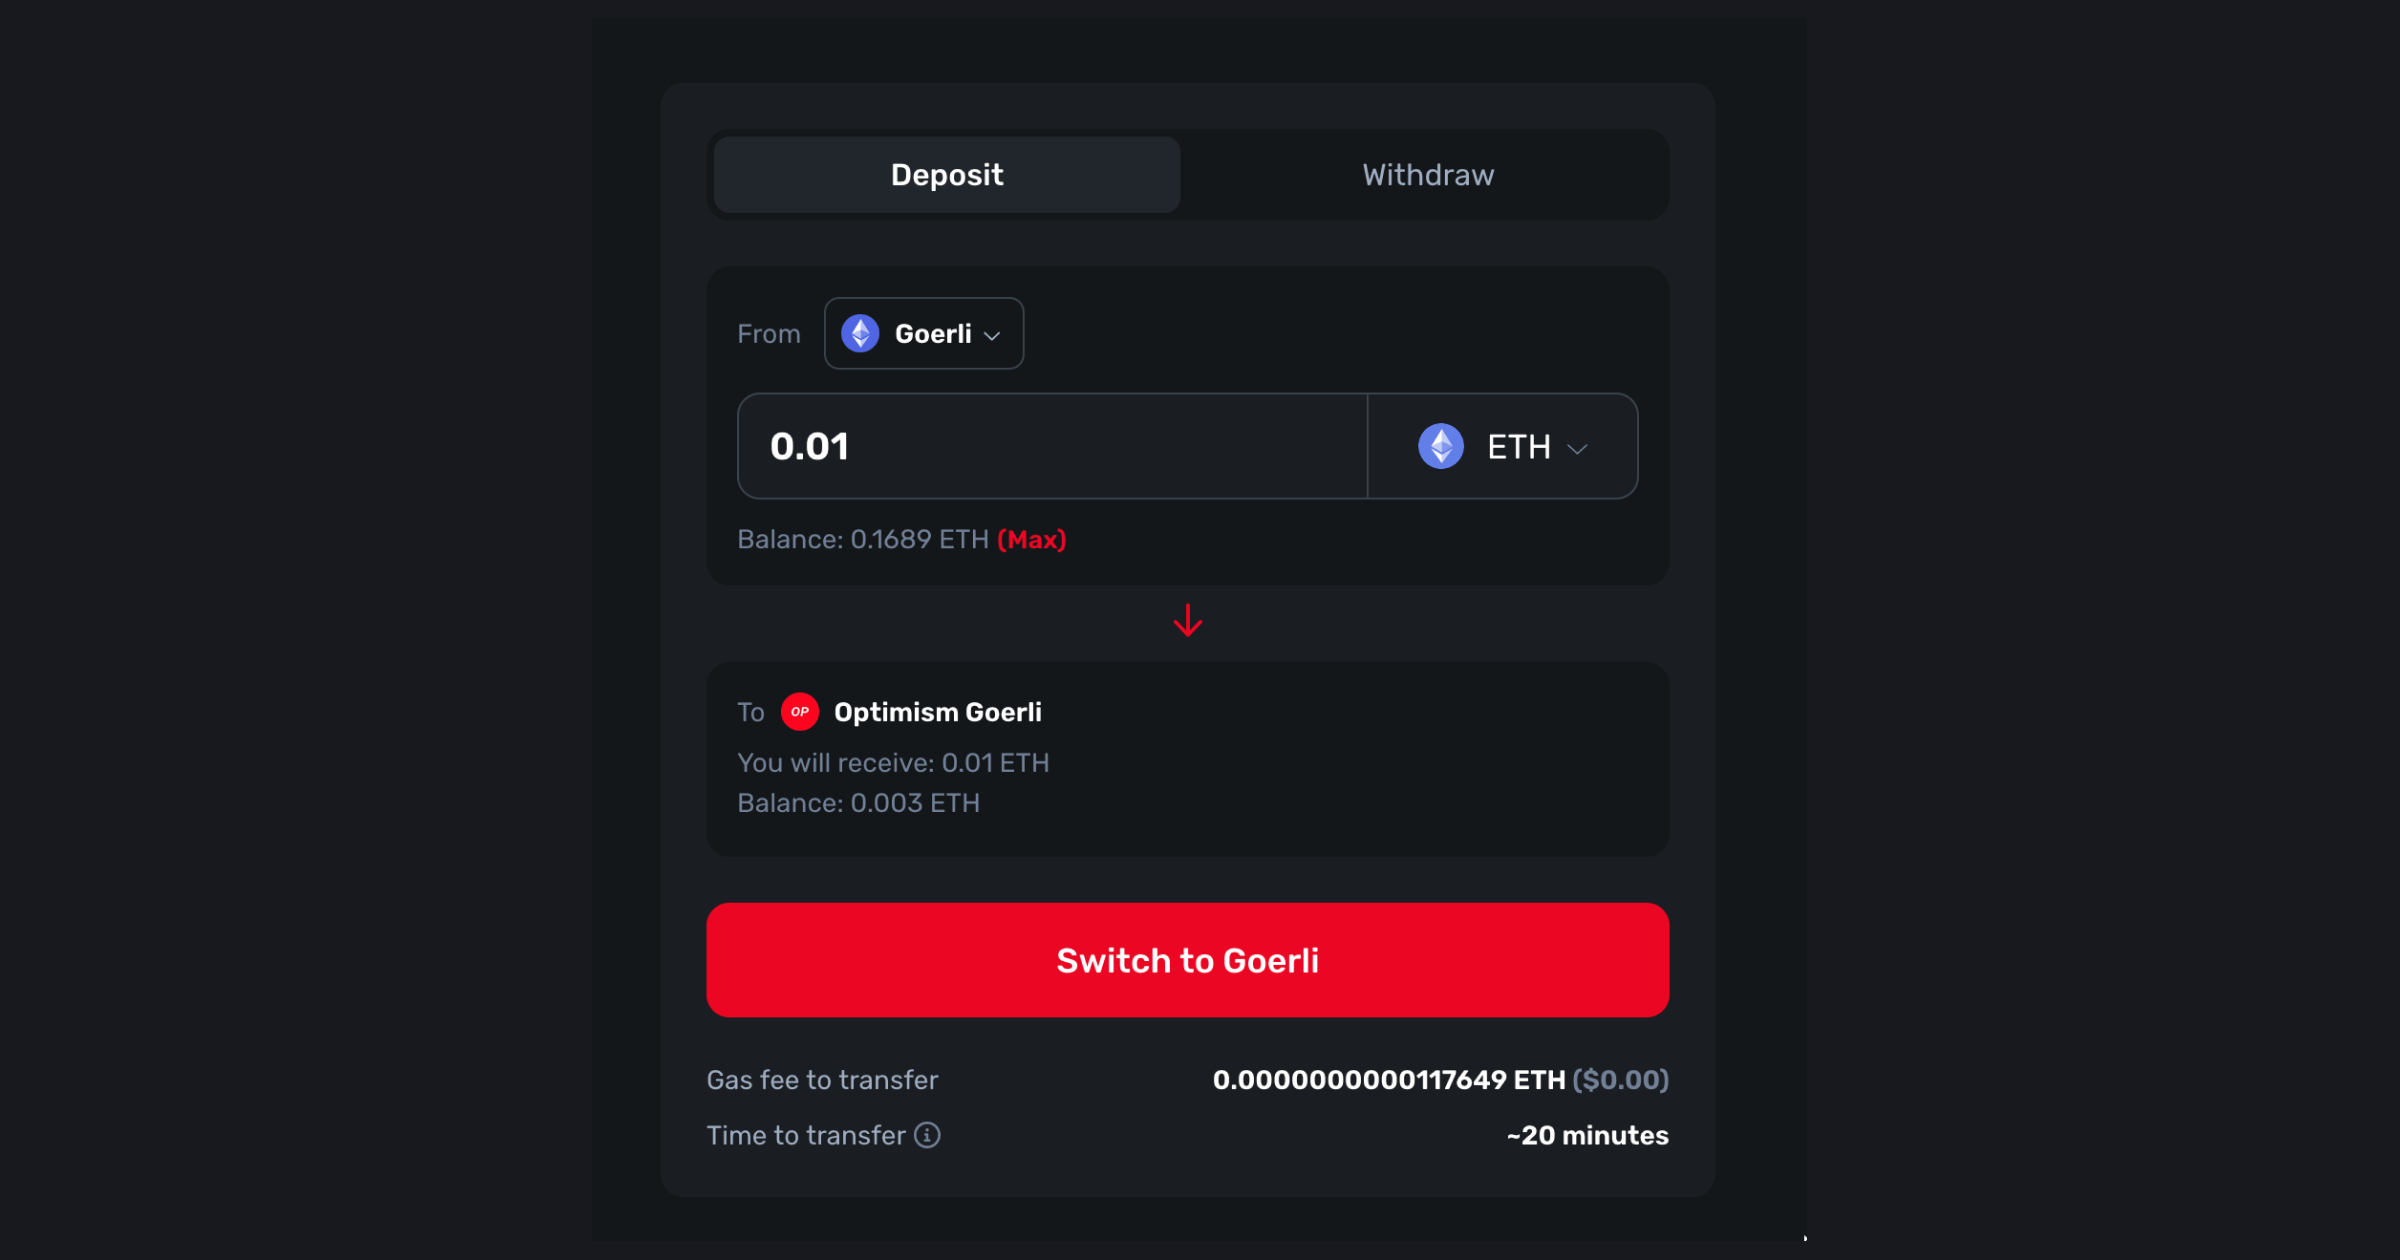 Add in amount to deposit and switch wallet to goerli